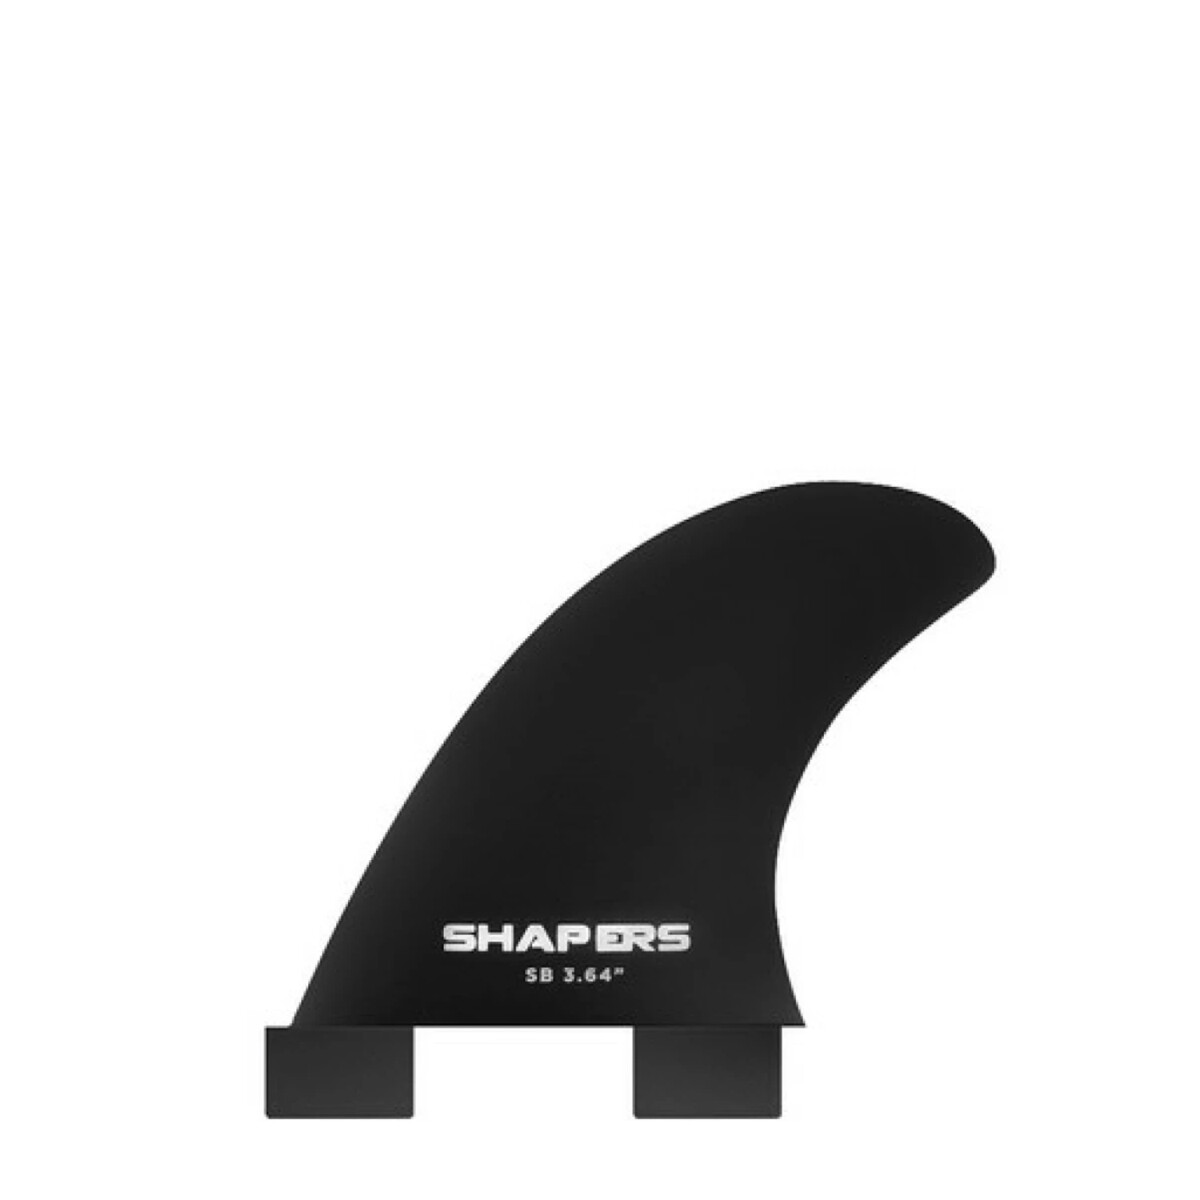 Quilla Shapers Classic Side Bites - 3.64” Trans Black 